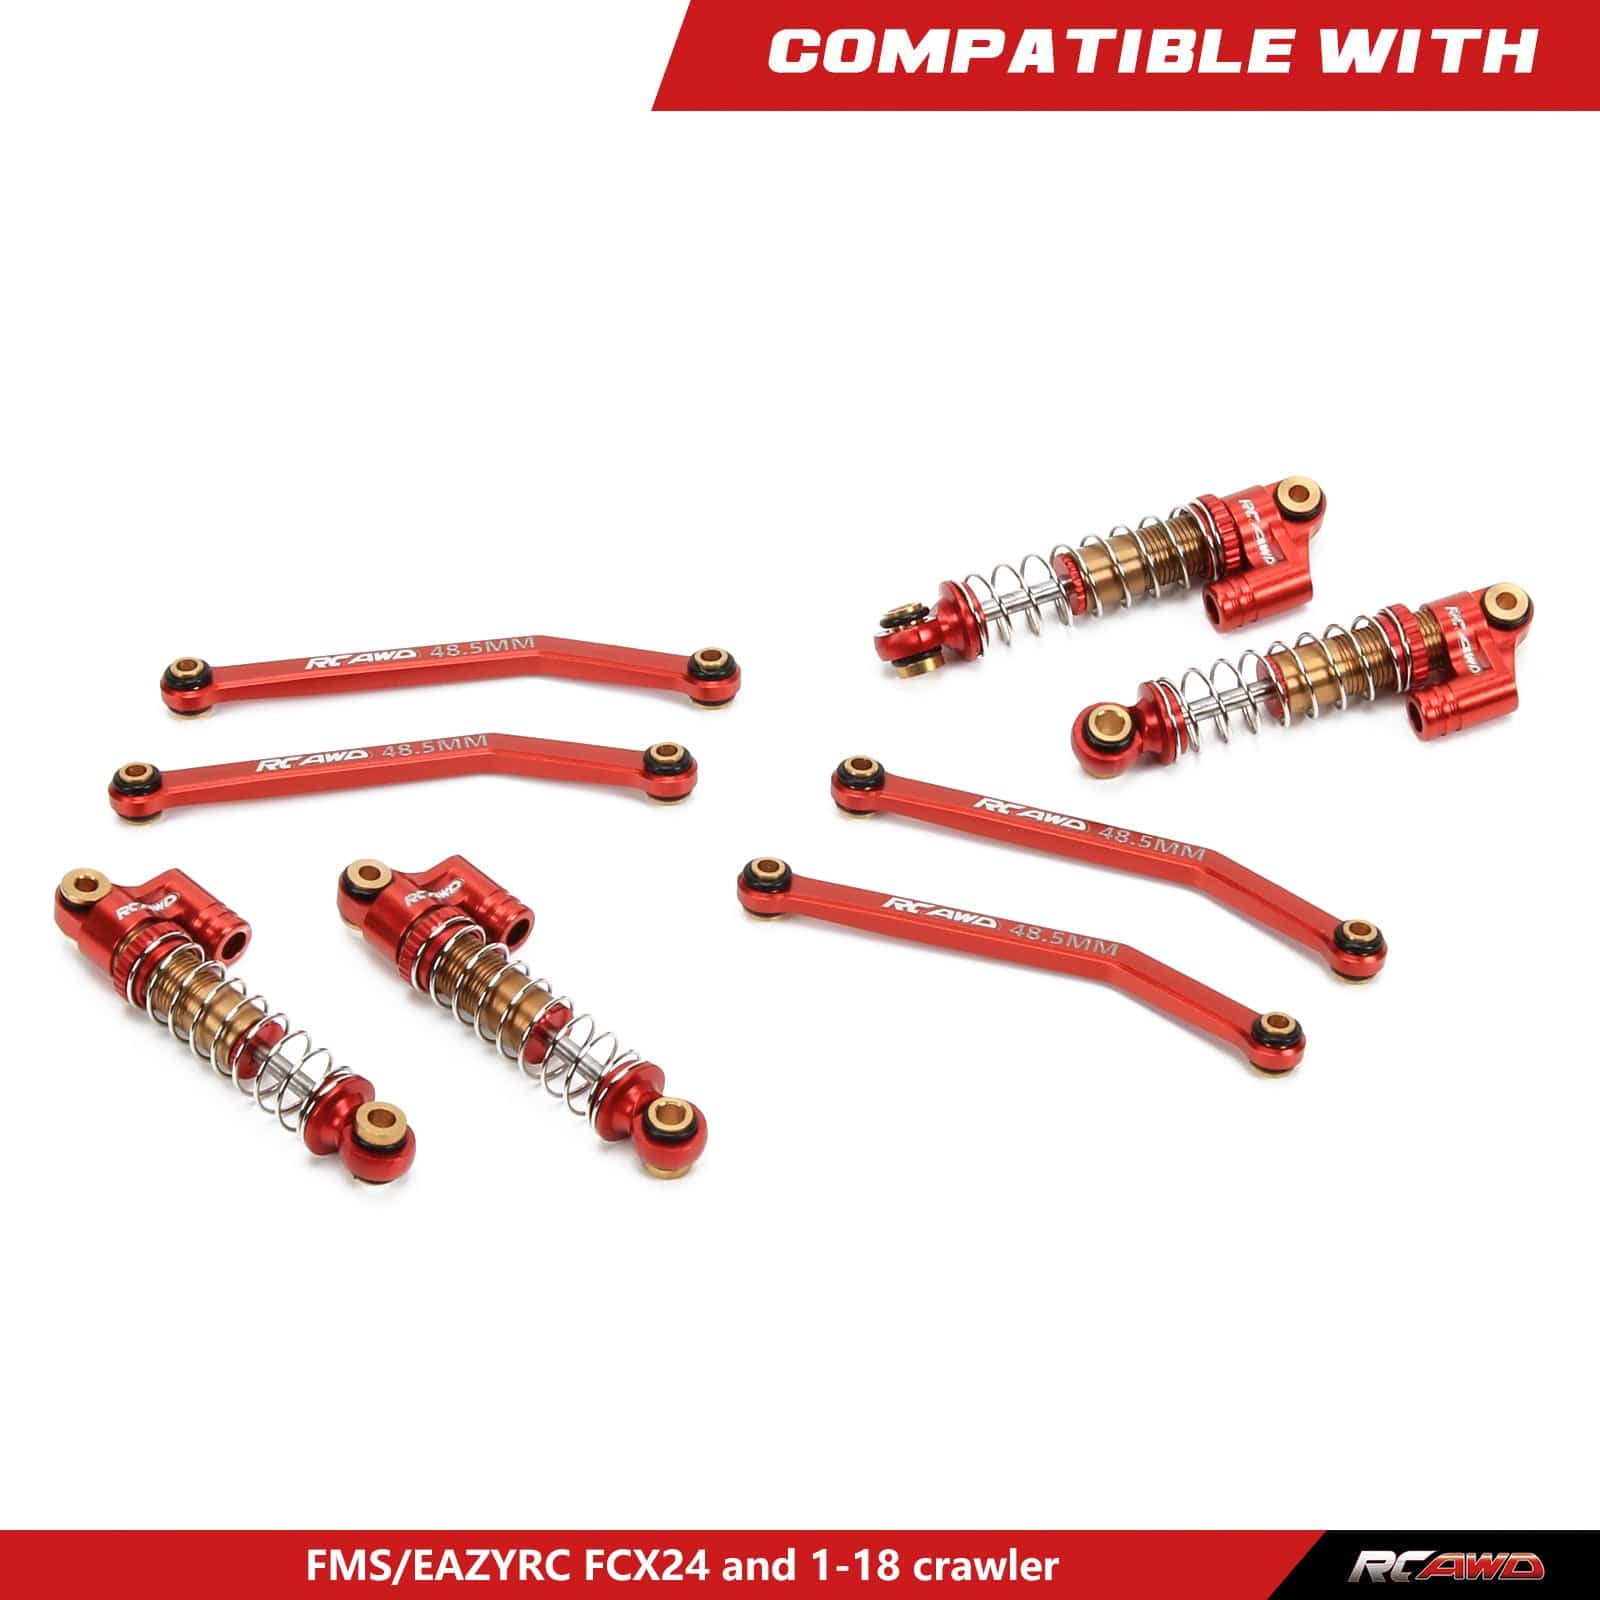 RCAWD FMS FCX24 RCAWD FMS FCX24 Upgrades Damper Shock Absorber Oil-Filled Type with 48.5mm Links